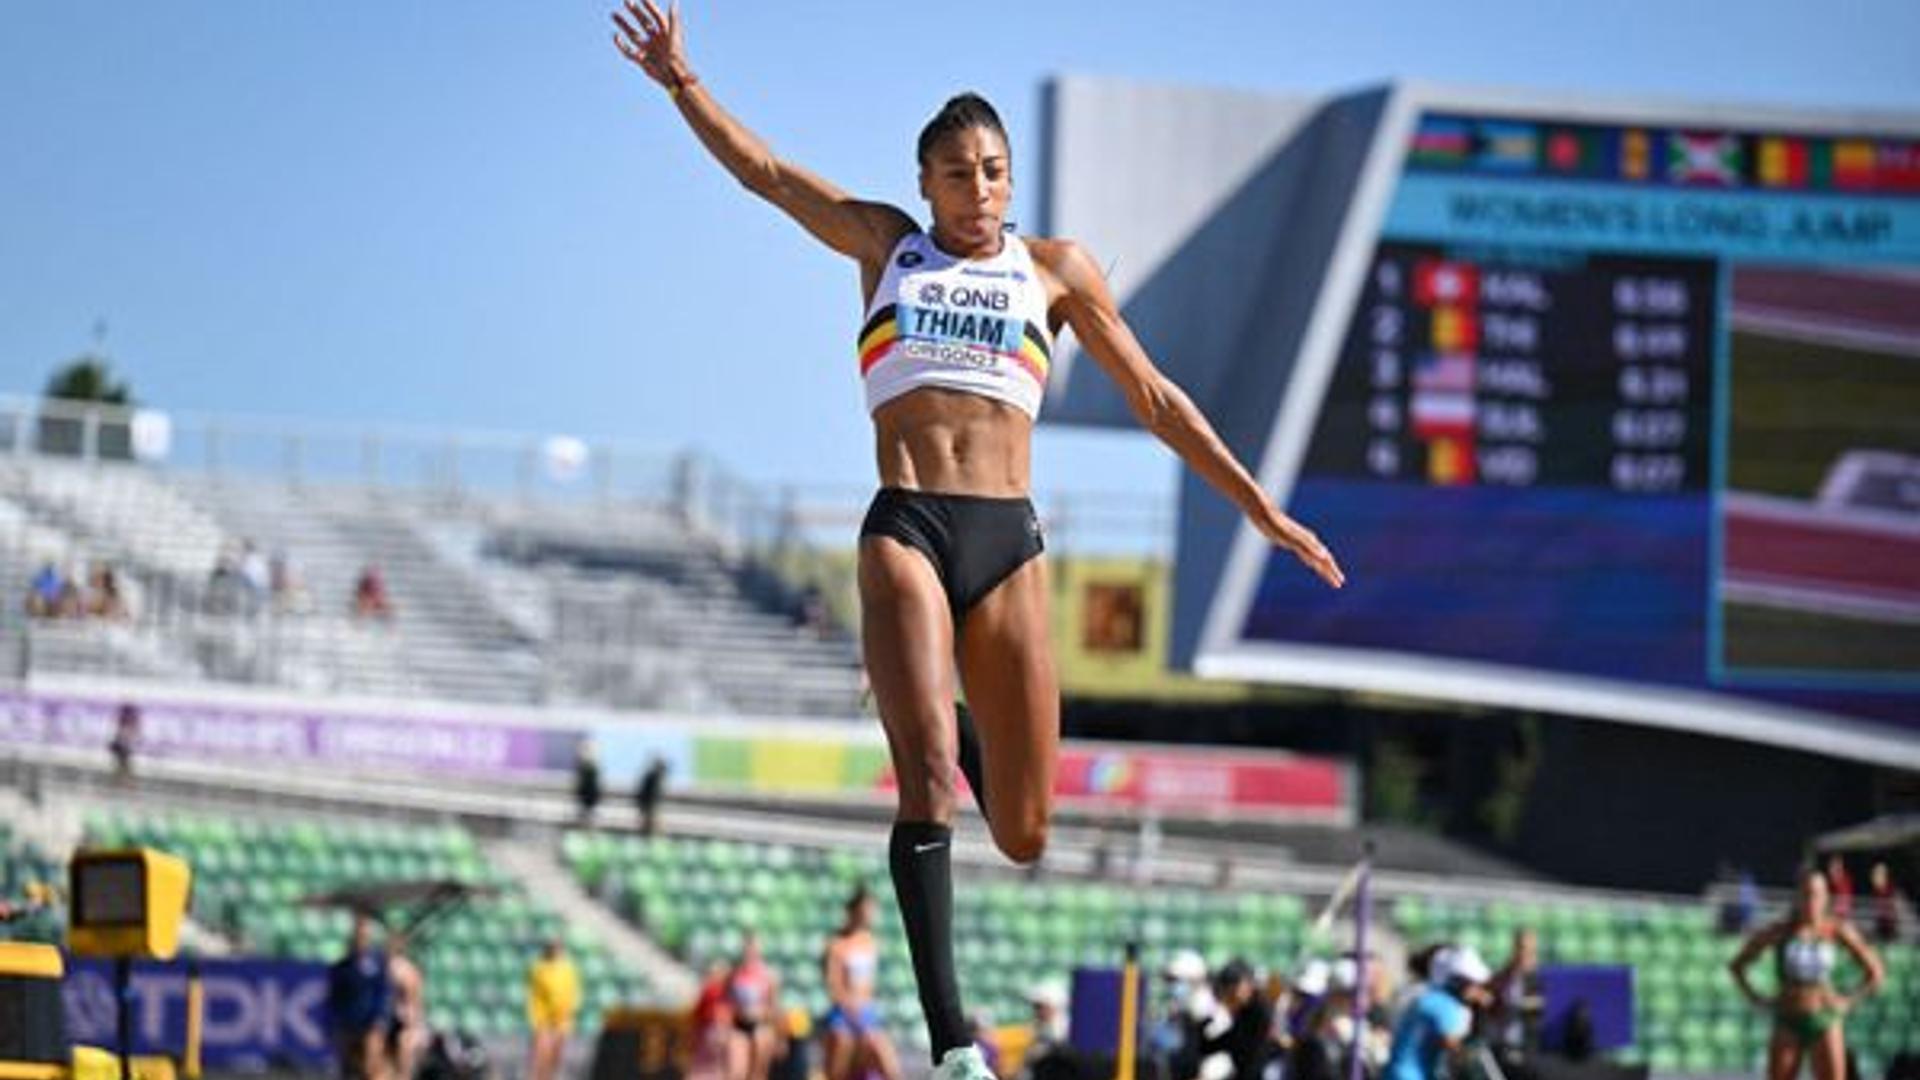 Nafissatou Thiam in action during the long jump event at World Championships 2022 (Image Credits - World Athletics)